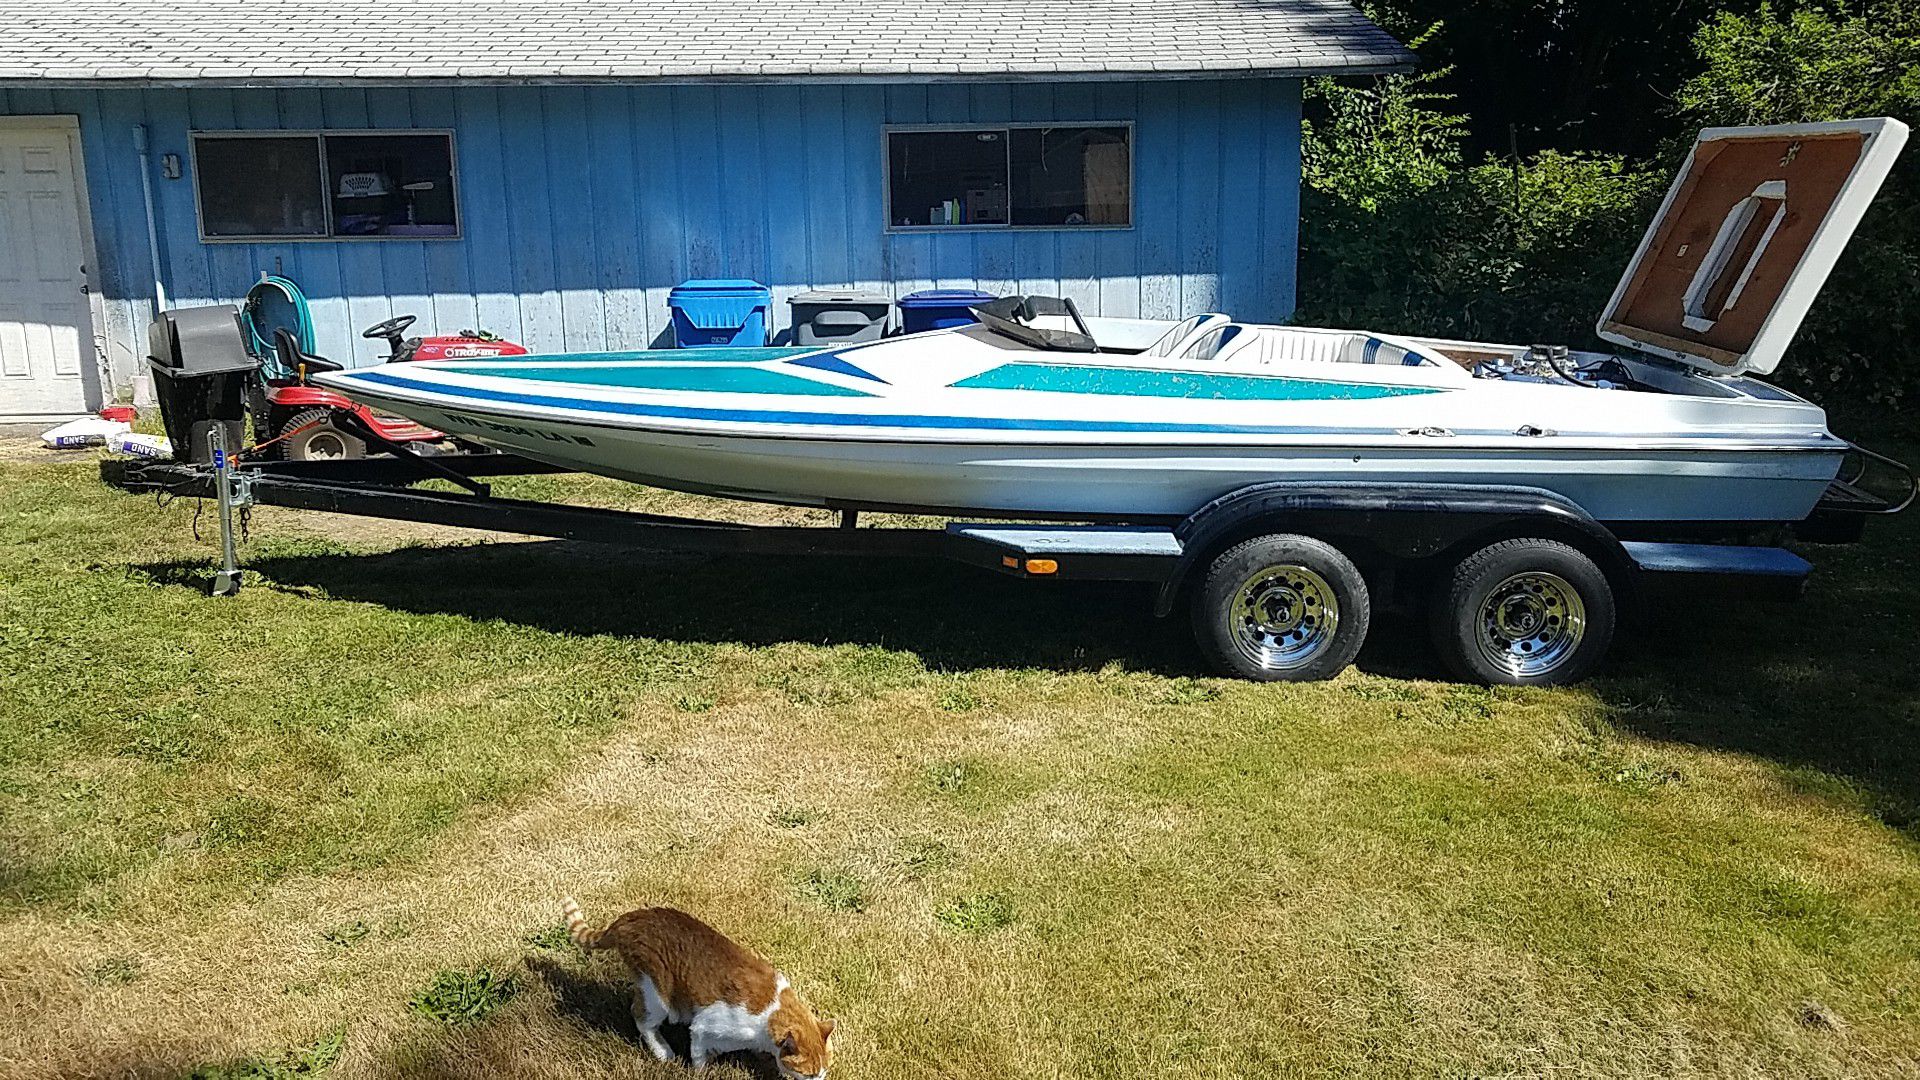 1979 Hawaiian jet boat for Sale in Tacoma, WA - OfferUp